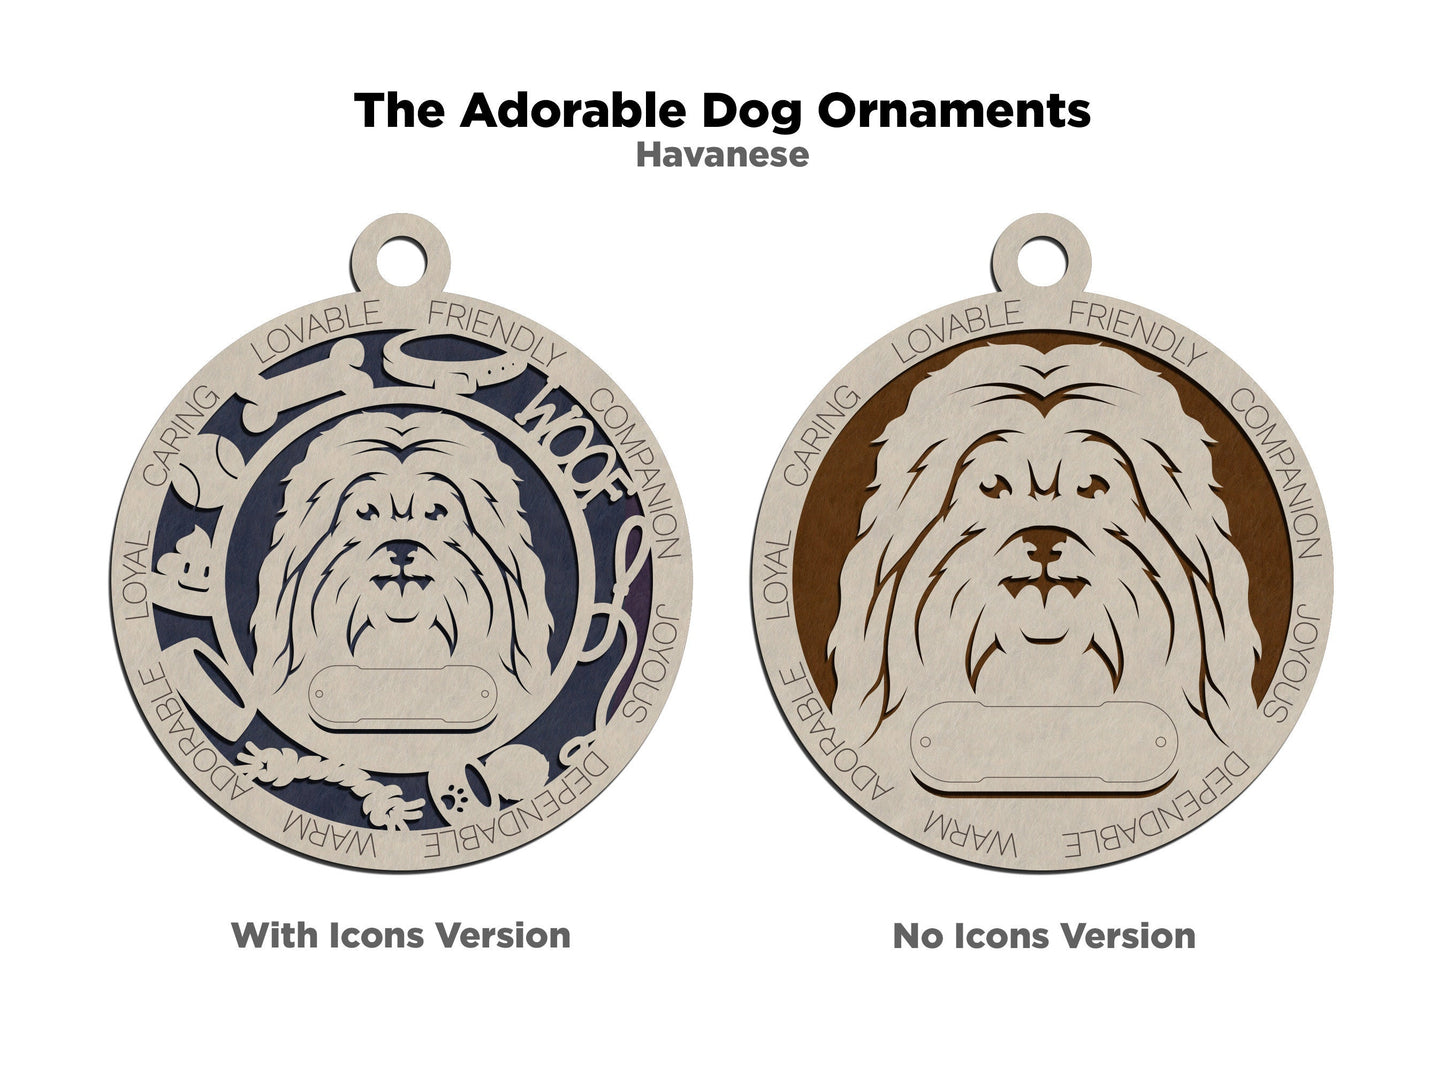 Havanese - Adorable Dog Ornaments - 2 Ornaments included - SVG, PDF, AI File Download - Sized for Glowforge